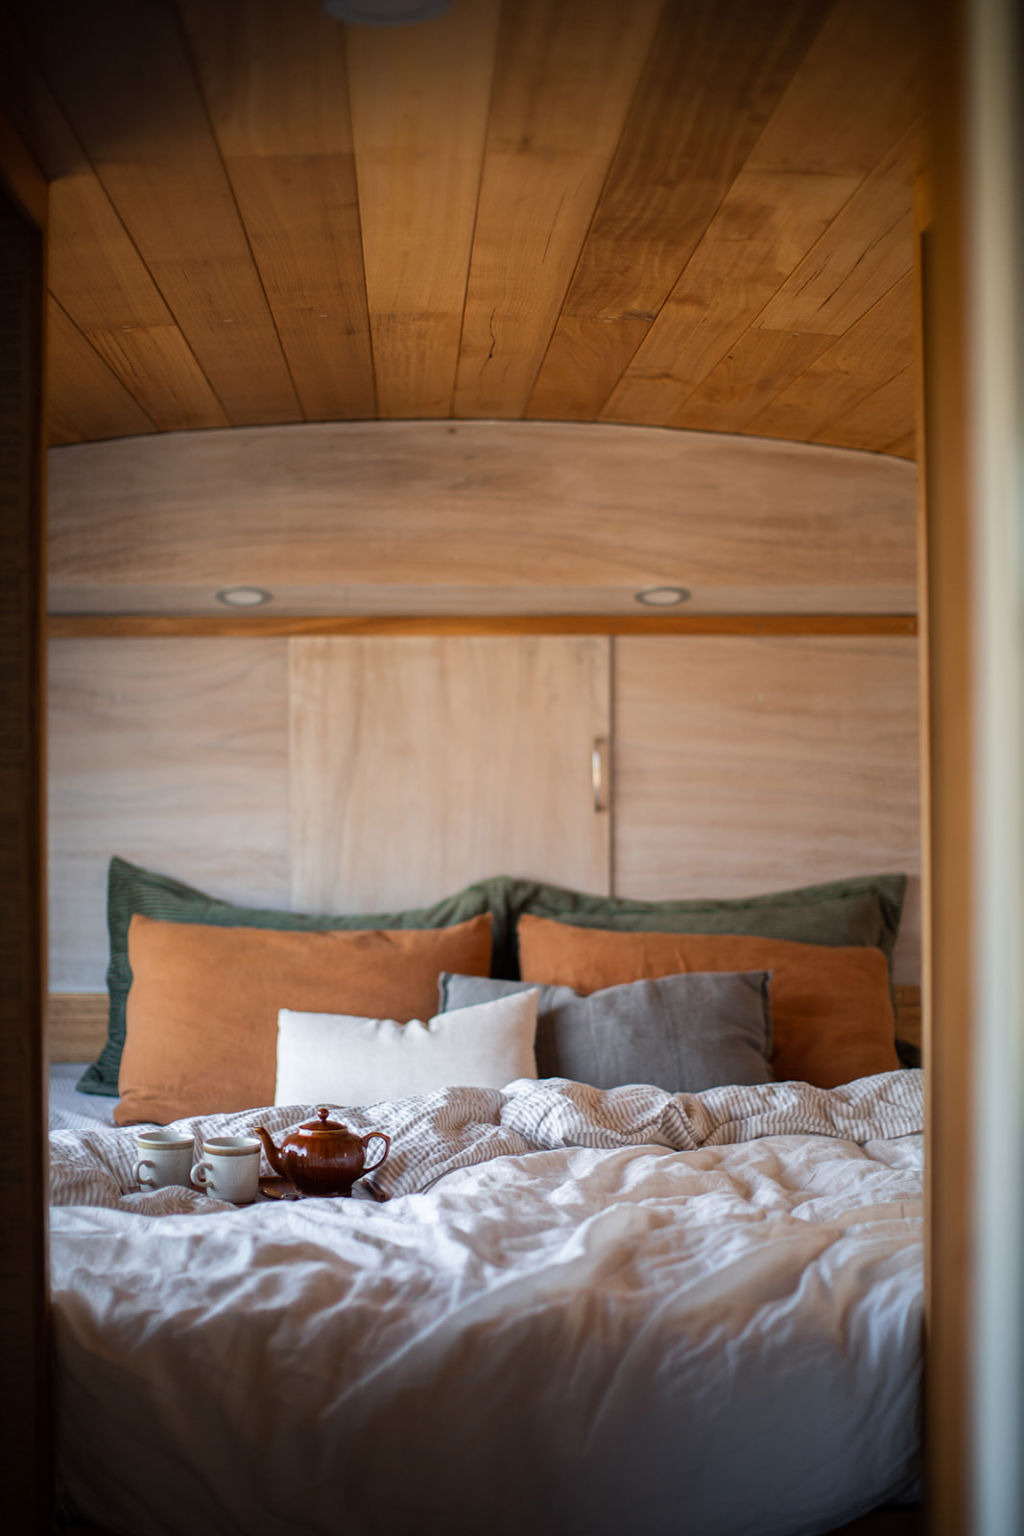 The bus is now offered as guest accommodation and features linen sheets, hand-made ceramics and artwork by local artisans.  Photo: Lauren McKinnon